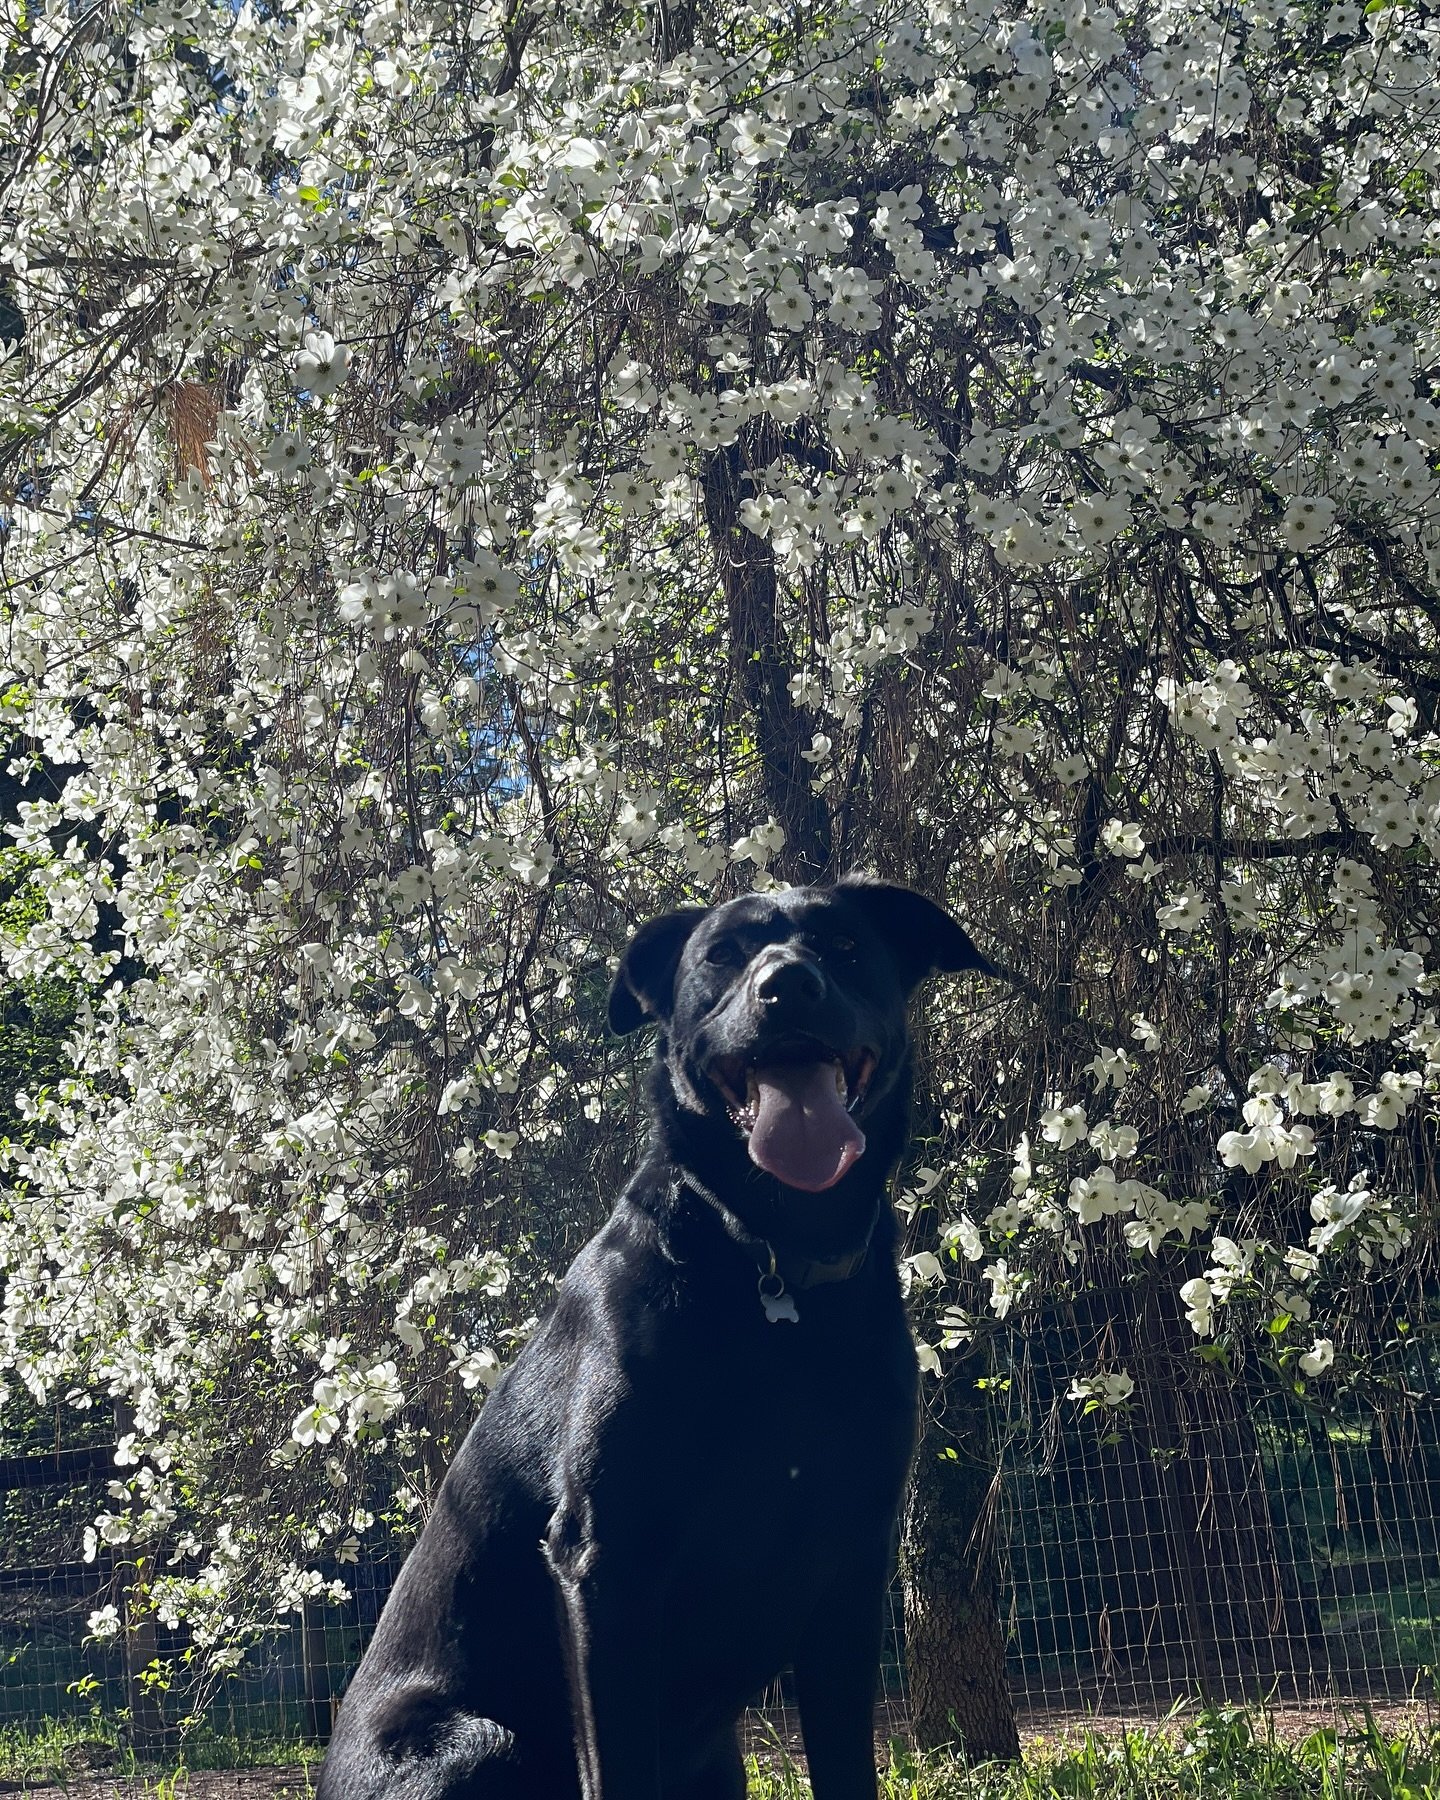 April showers bring May Dogwood flowers😍 
Joleen enjoying the blooms in the yard🐾
🐶Joleen, 2.5 year old Black Lab Mix from South Lake Tahoe, CA
.
.
.
#blacklab #dogboarding #dogdaycare